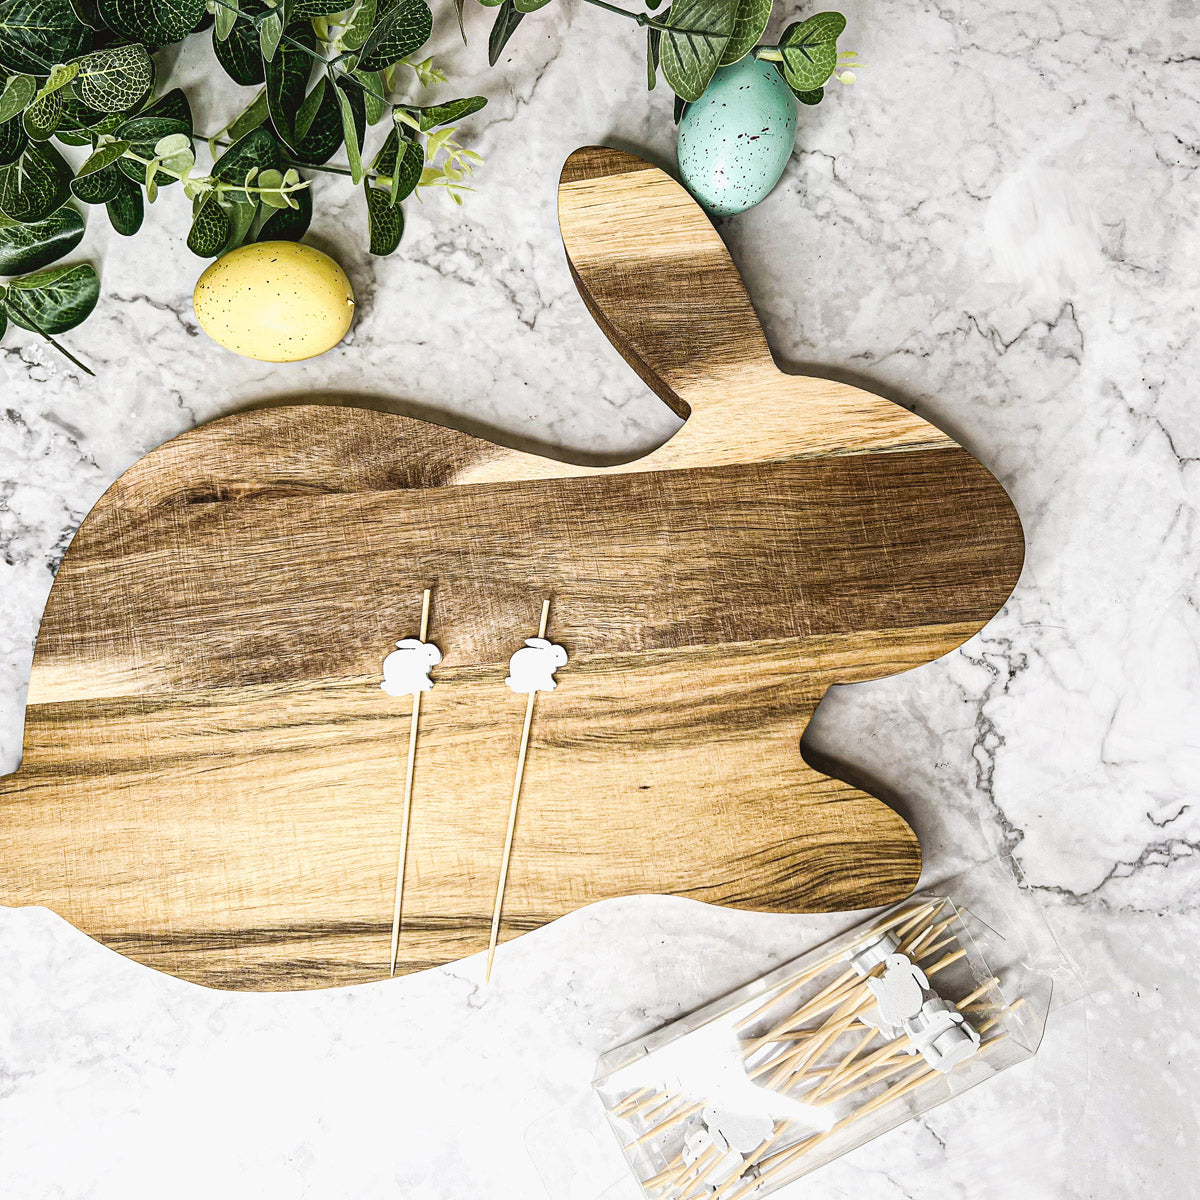 Bunny Cutting Board, Bunny Tooth Pick Packs